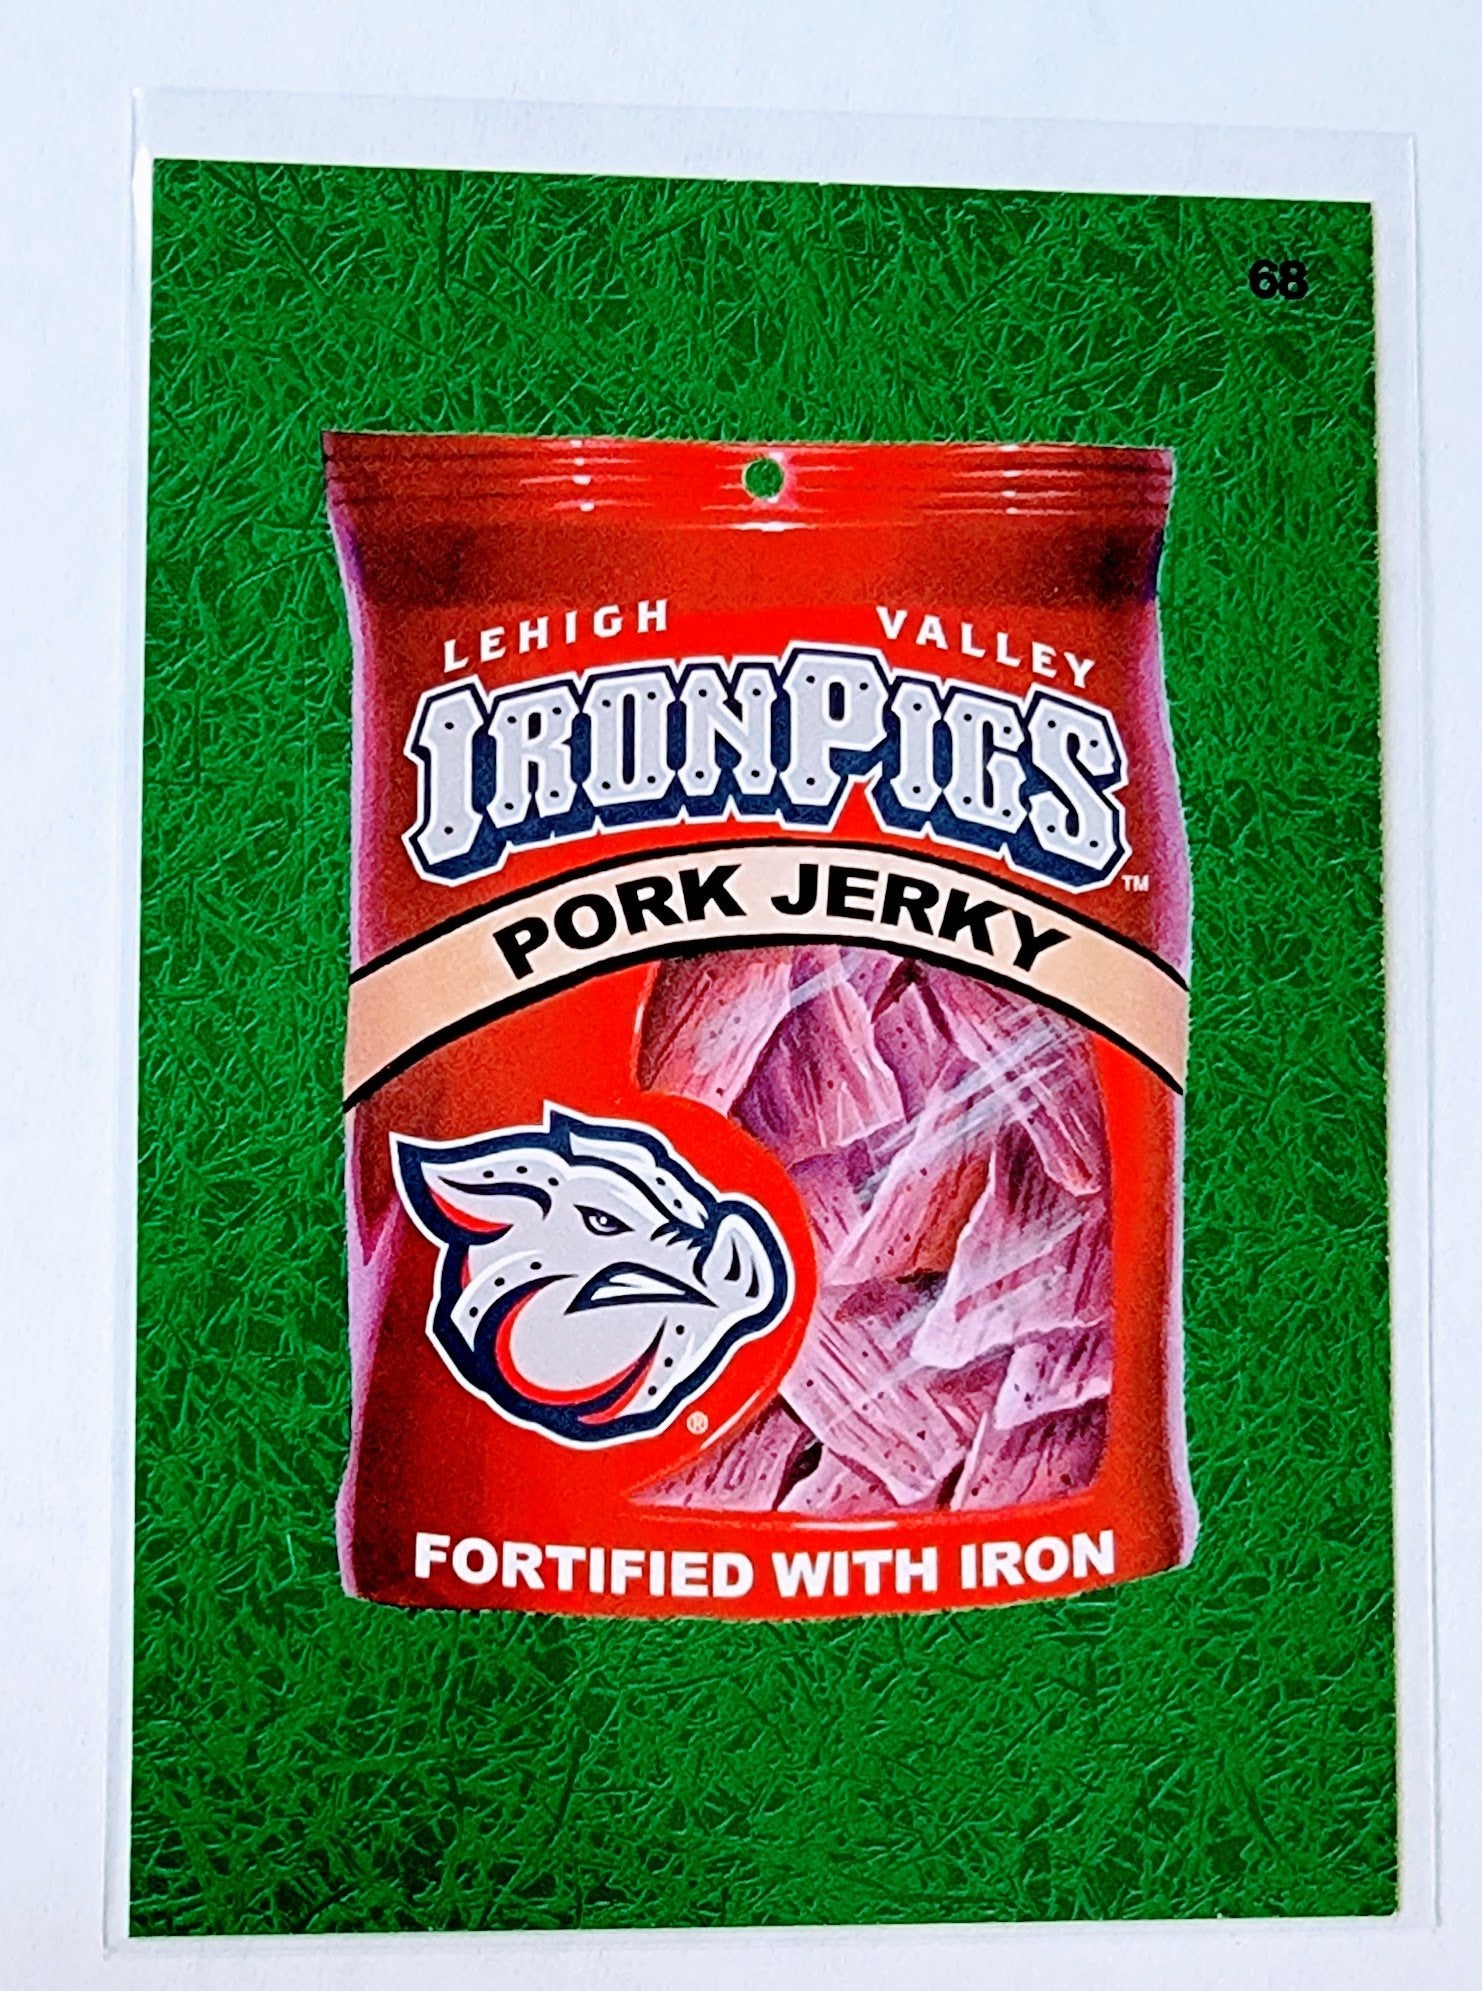 2016 Topps MLB Baseball Wacky Packages Iron Pigs Pork Jerky Green Grass Parallel Sticker Trading Card MCSC1 simple Xclusive Collectibles   